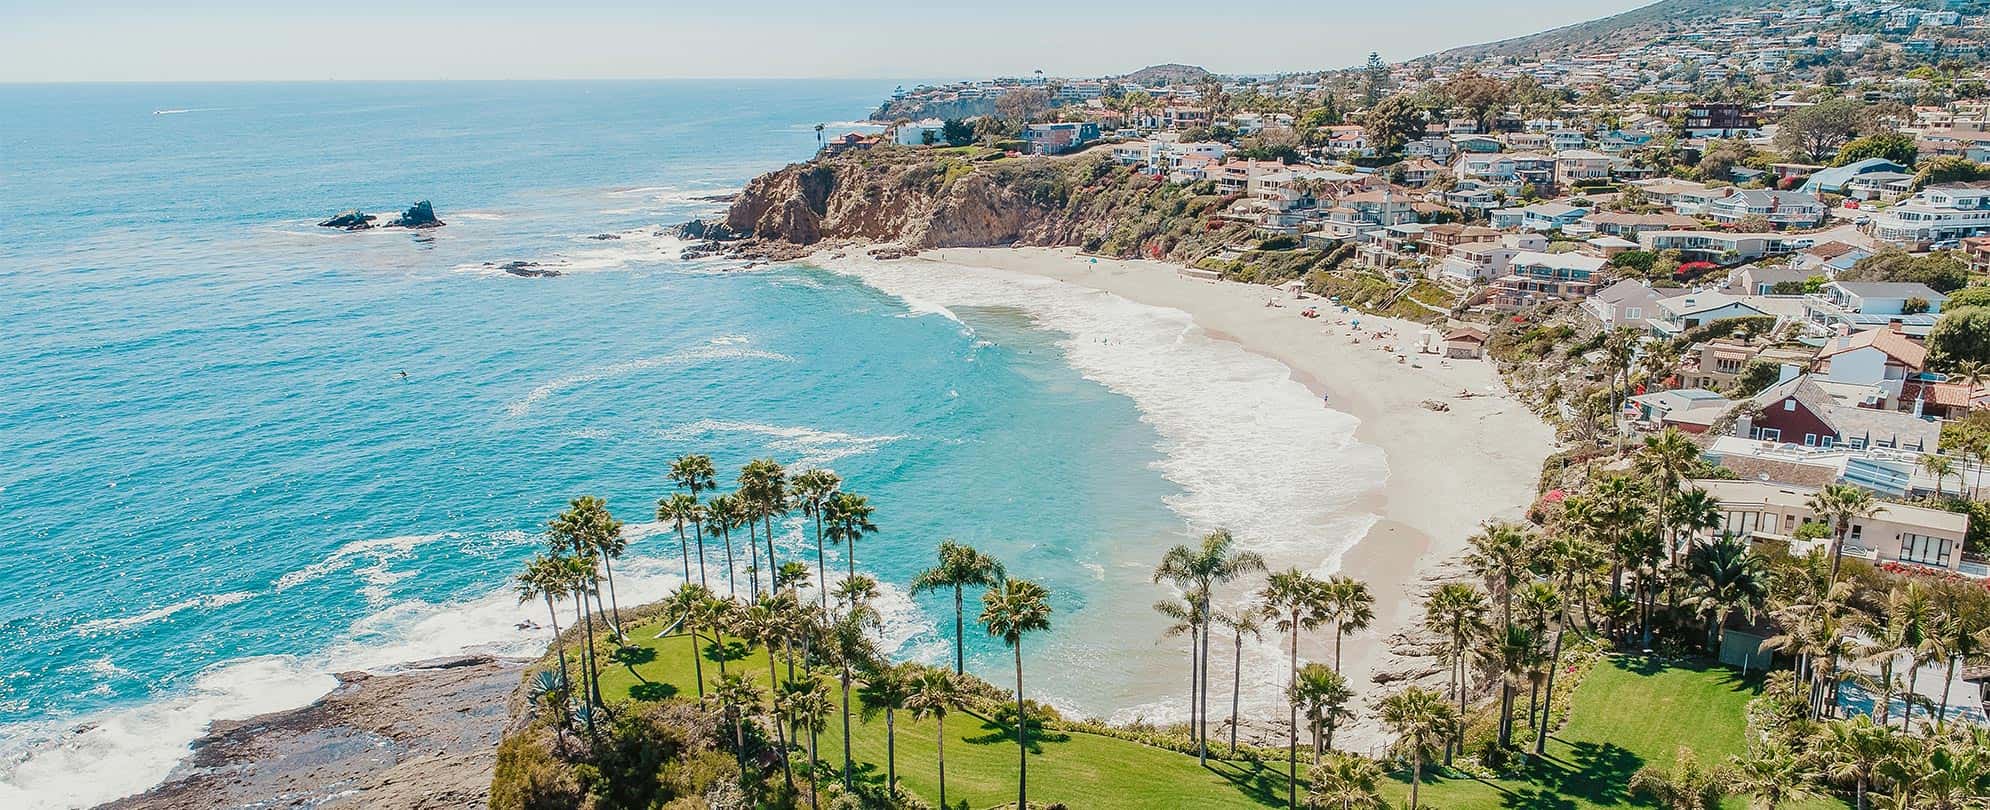 The ocean, sand, and surrounding houses and palm trees at Laguna Beach in California.